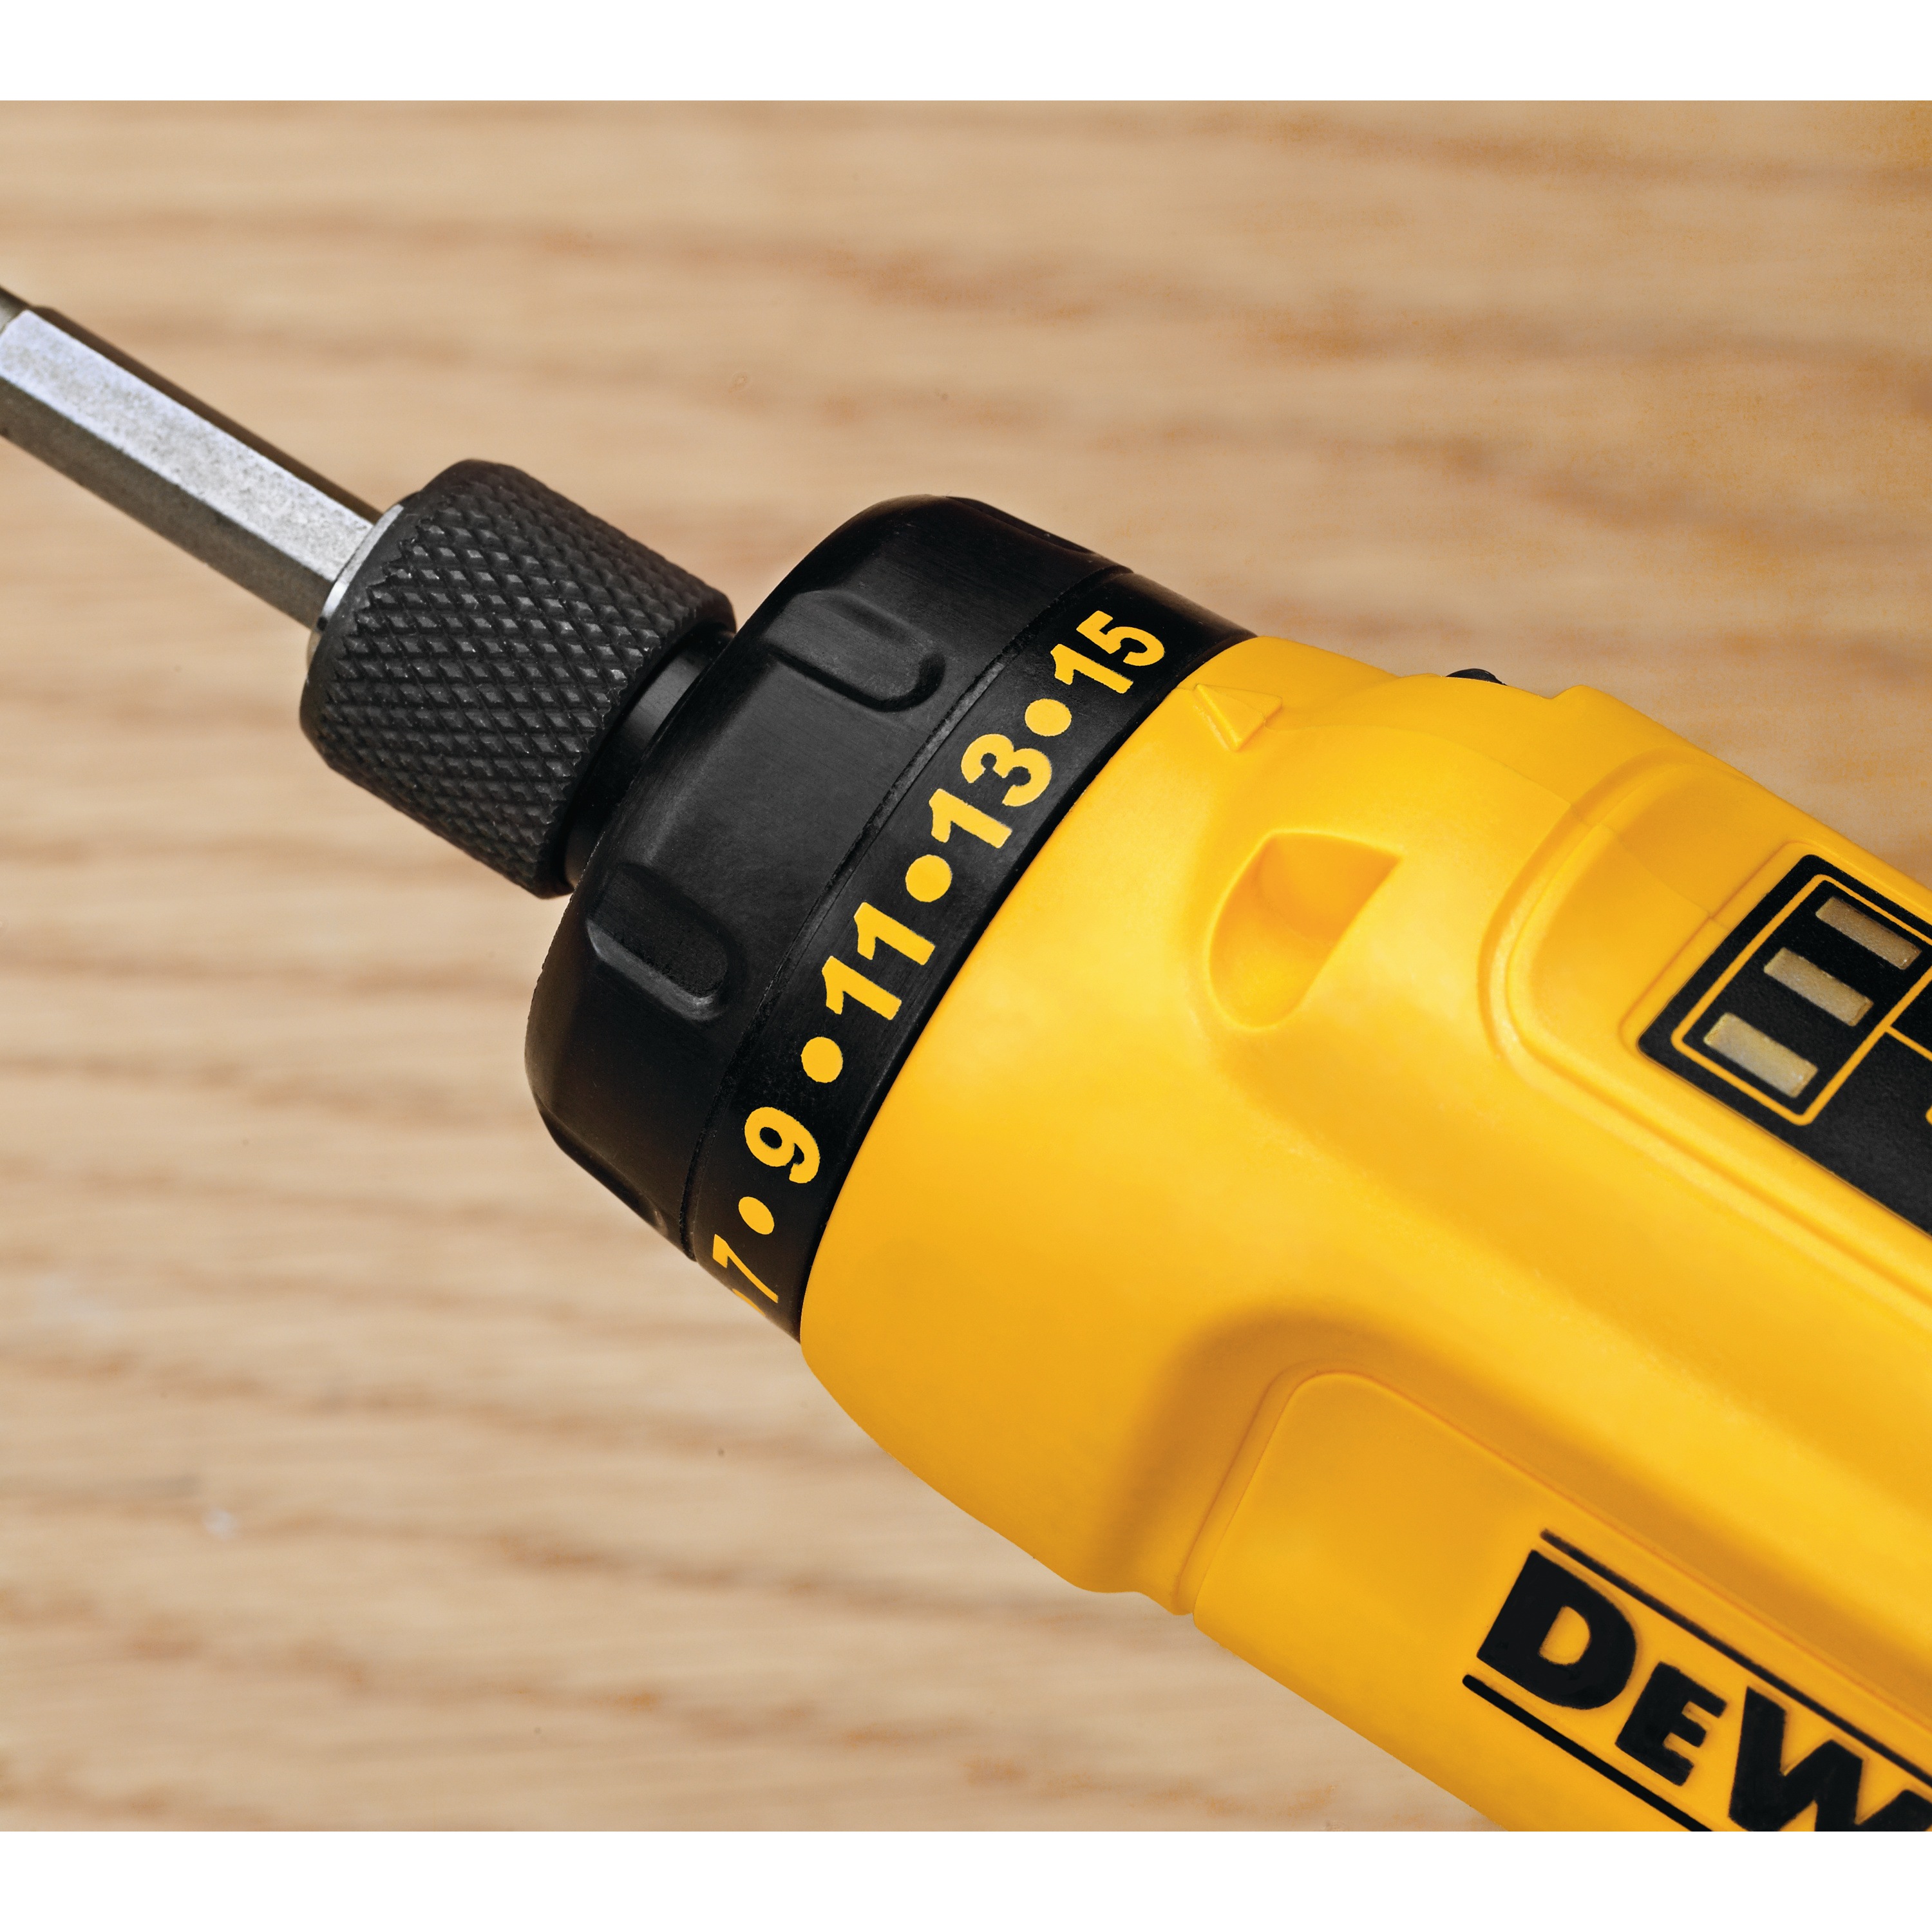 Variable speed feature dial of gyroscopic screwdriver 2 battery.